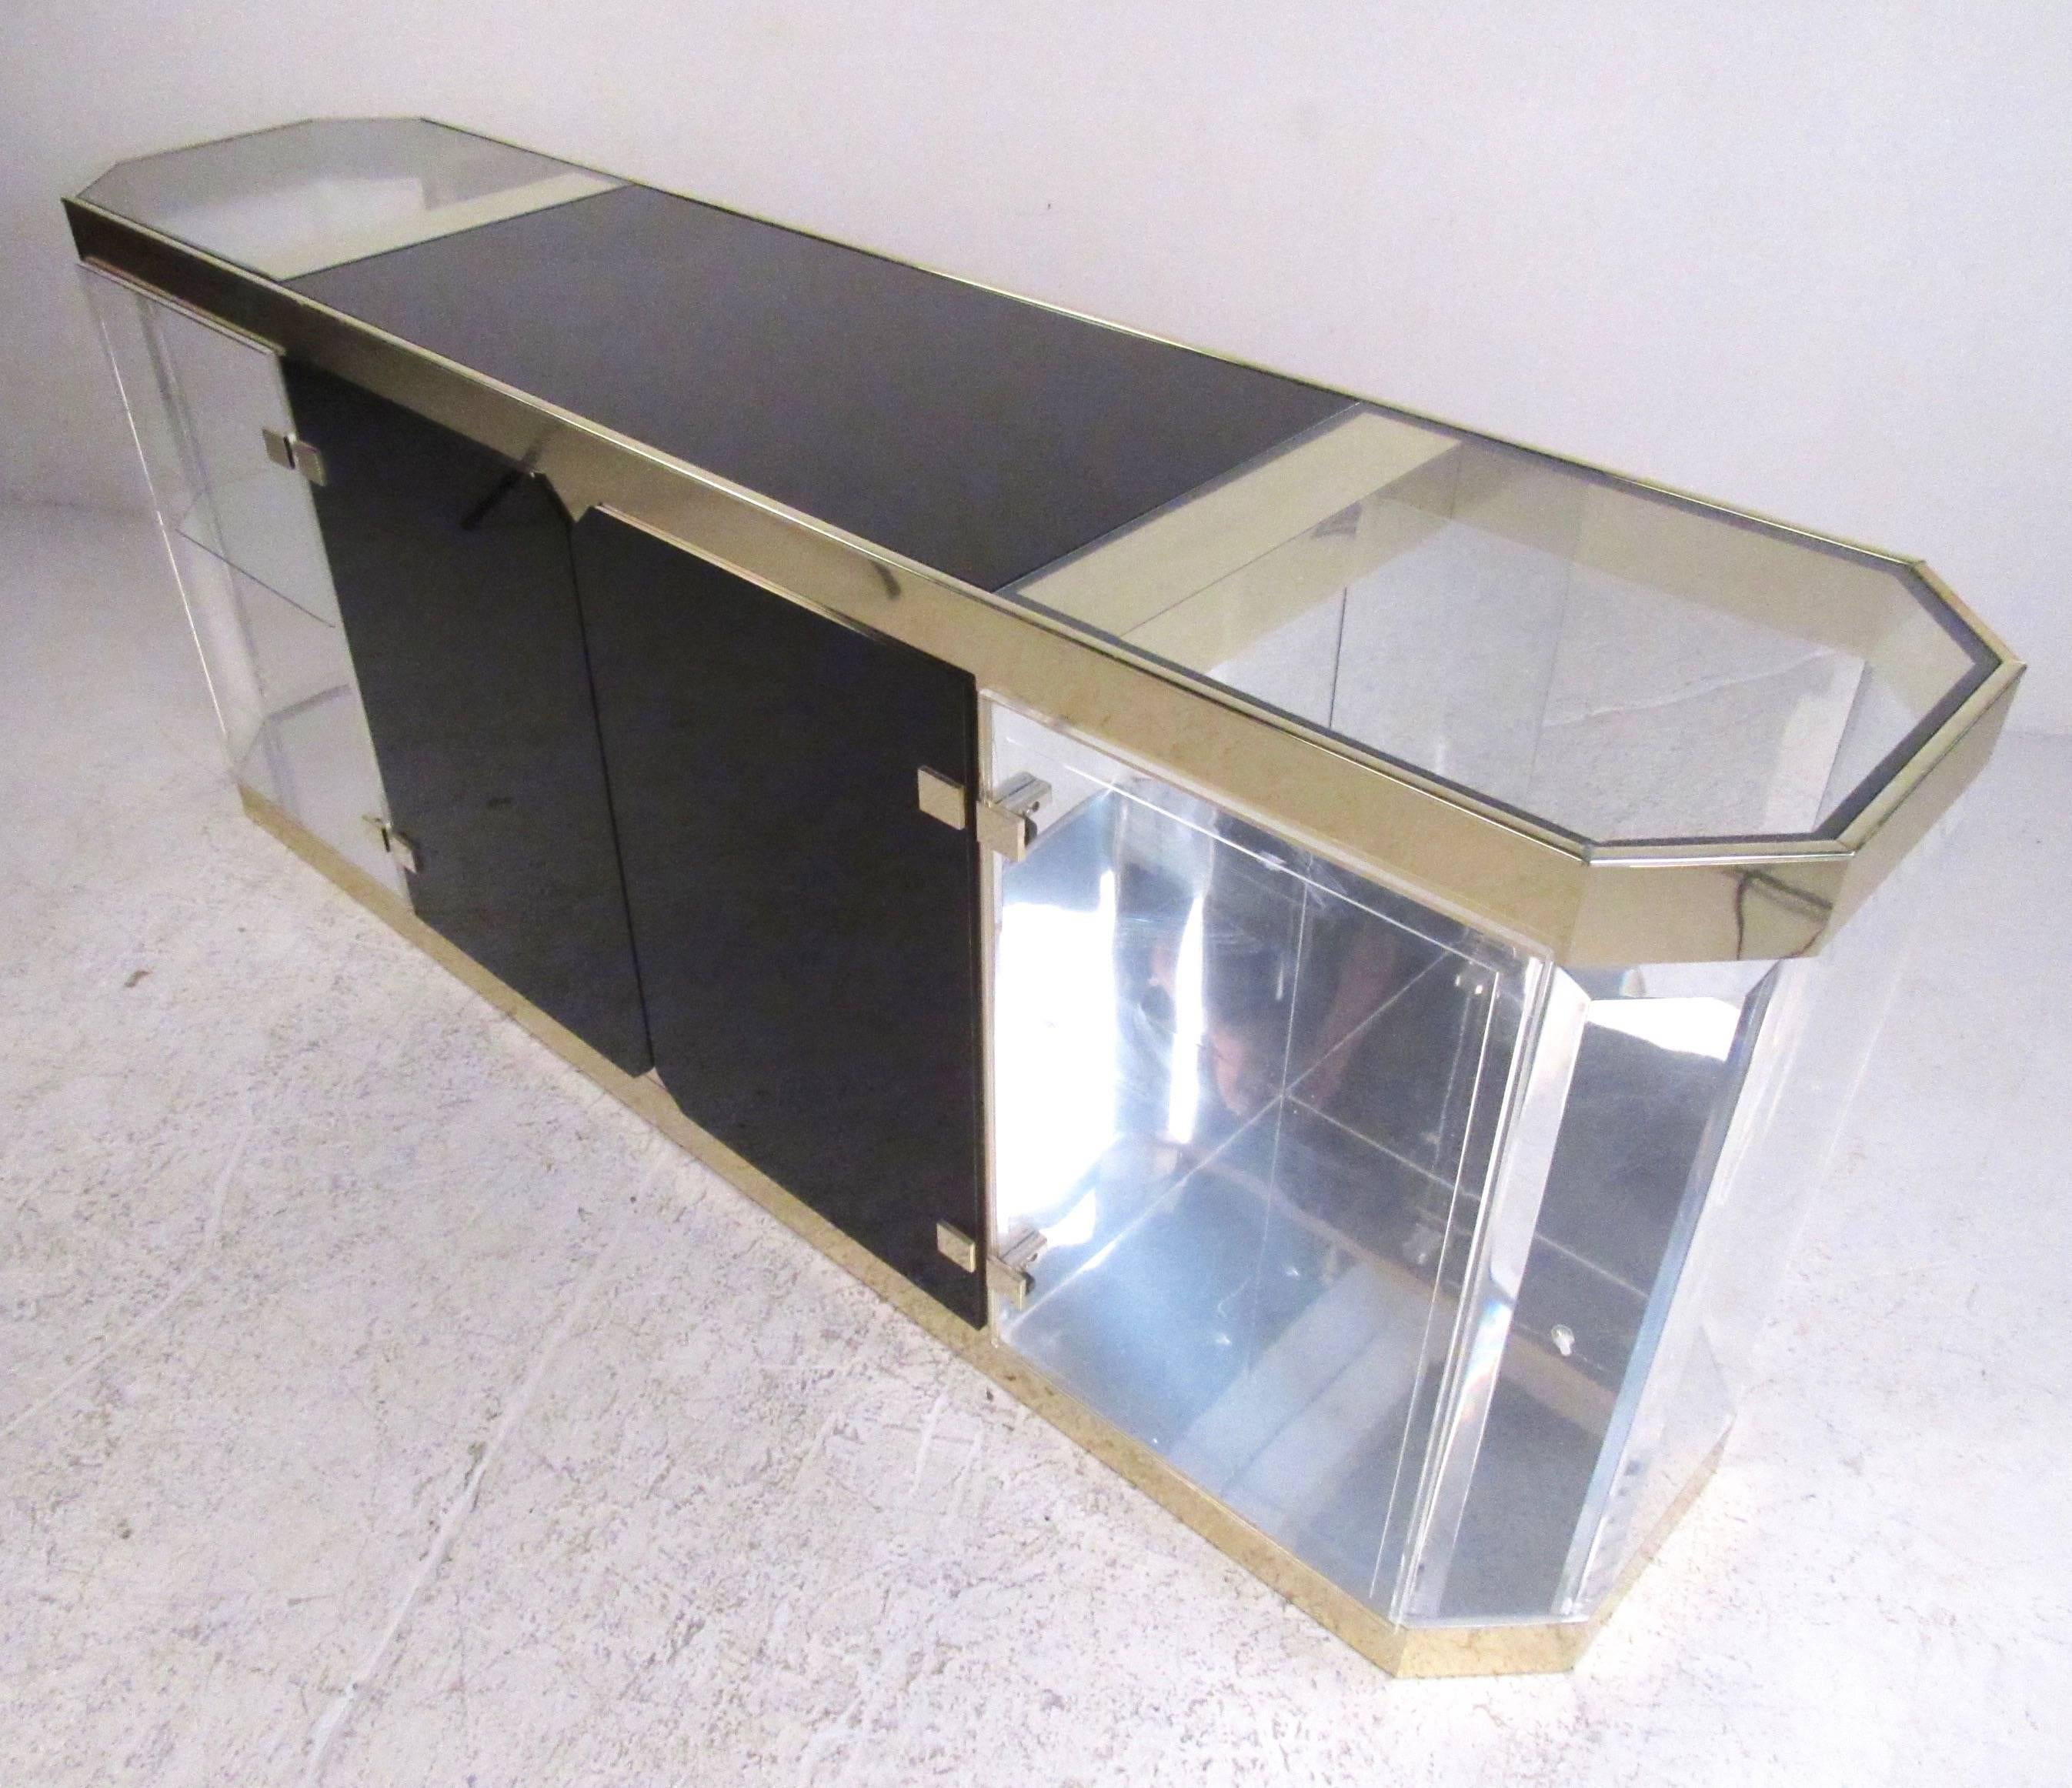 This unique vintage modern display sideboard features stylish brass finish trim, dark glass centre cabinet, and mirrored back Lucite displays on either side. Interior lights add to the value of this sideboard as a showroom display case, as it makes